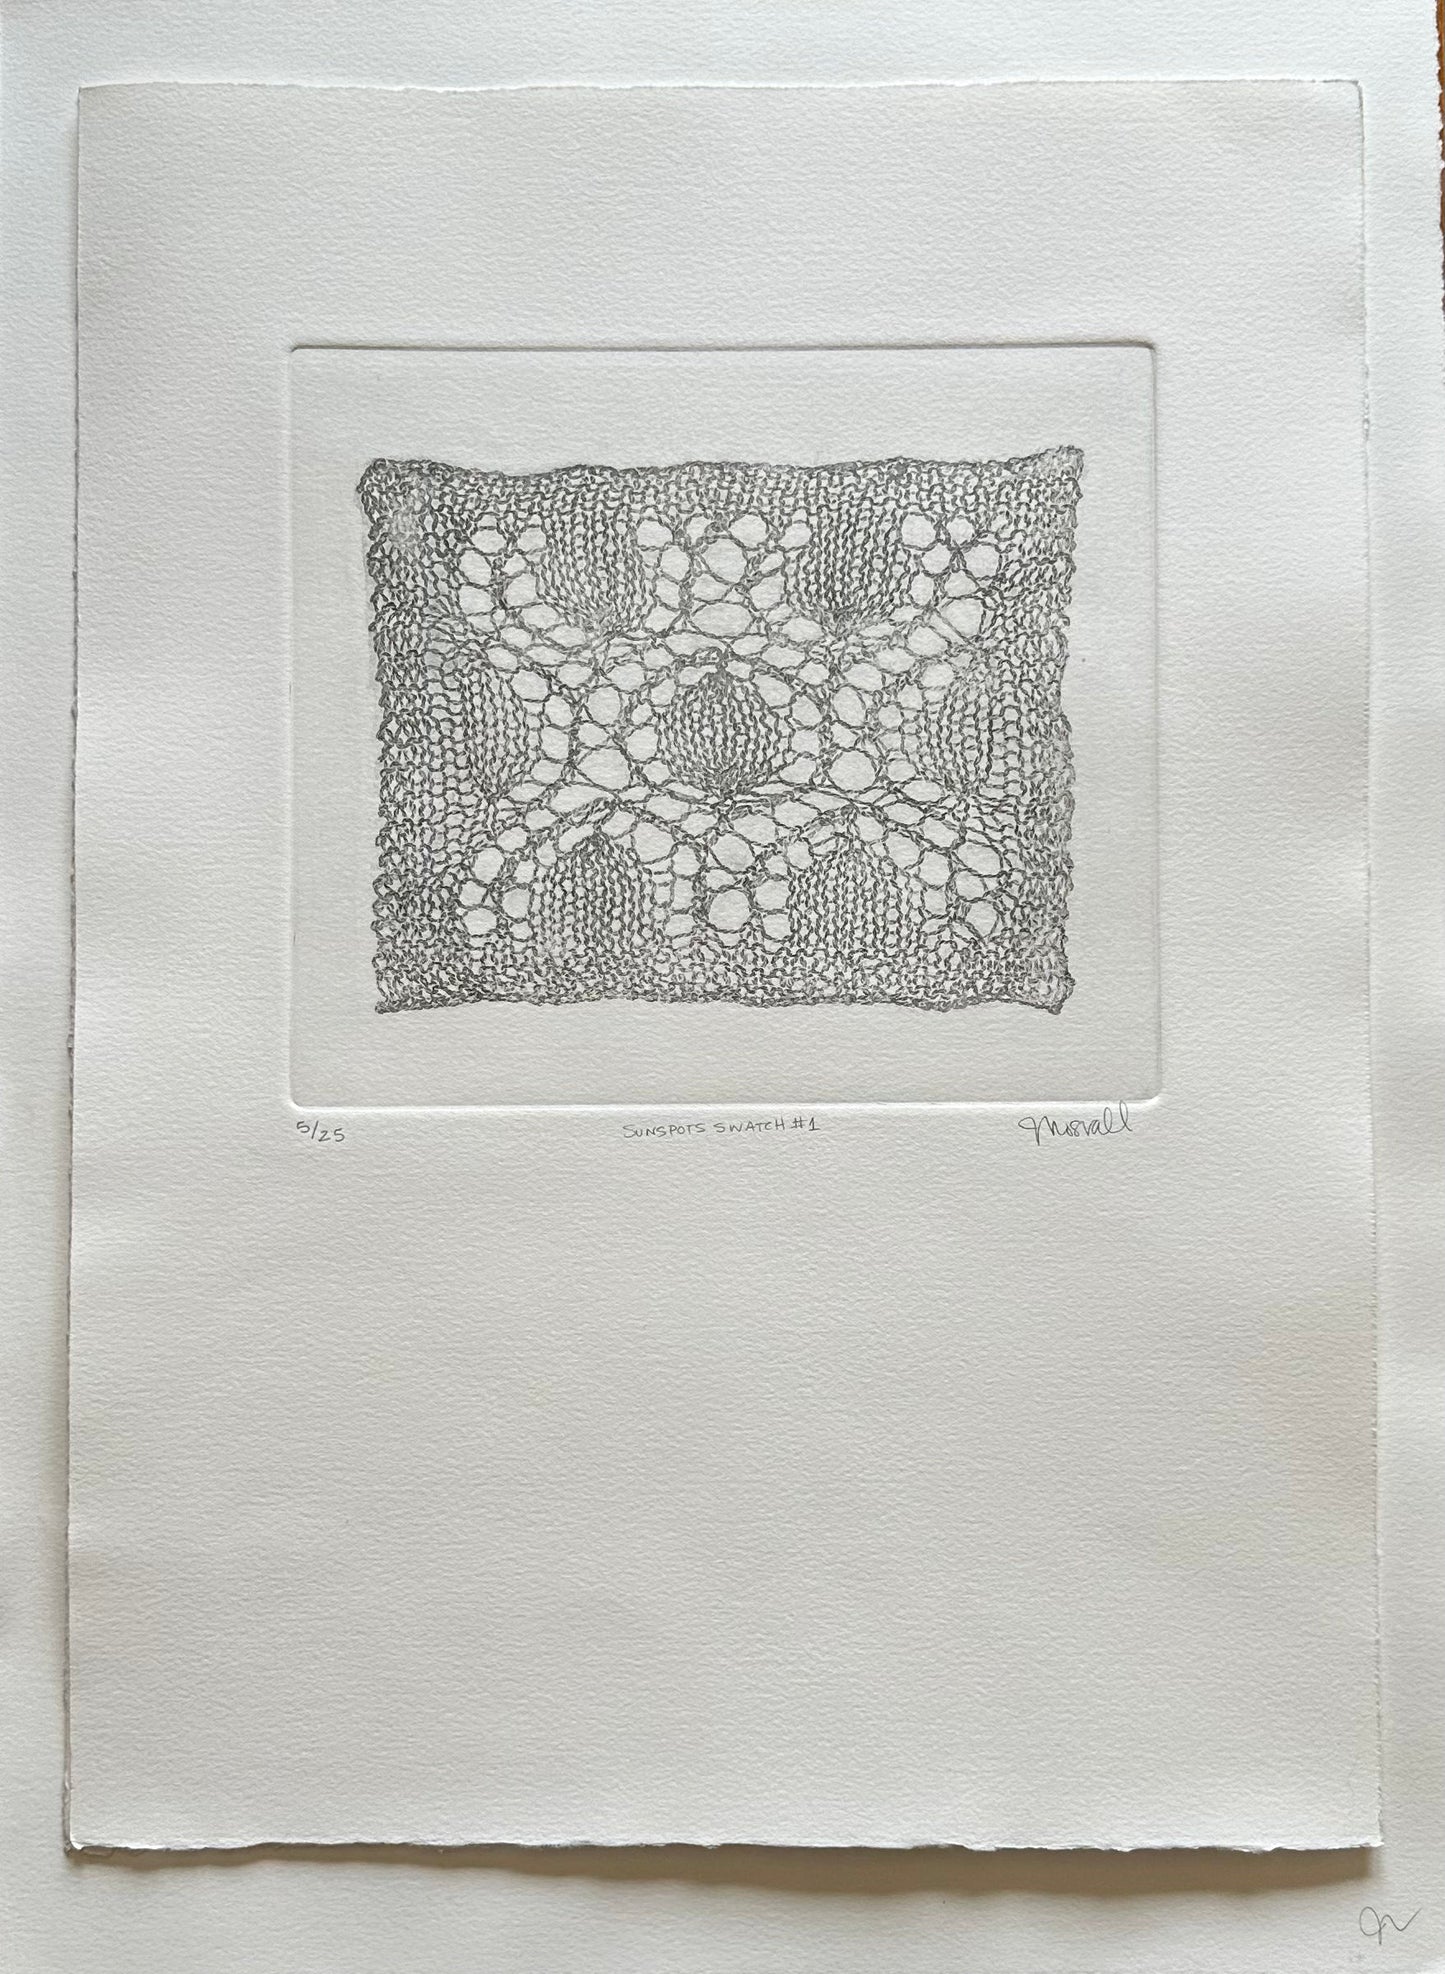 Sunspots Swatch Etching